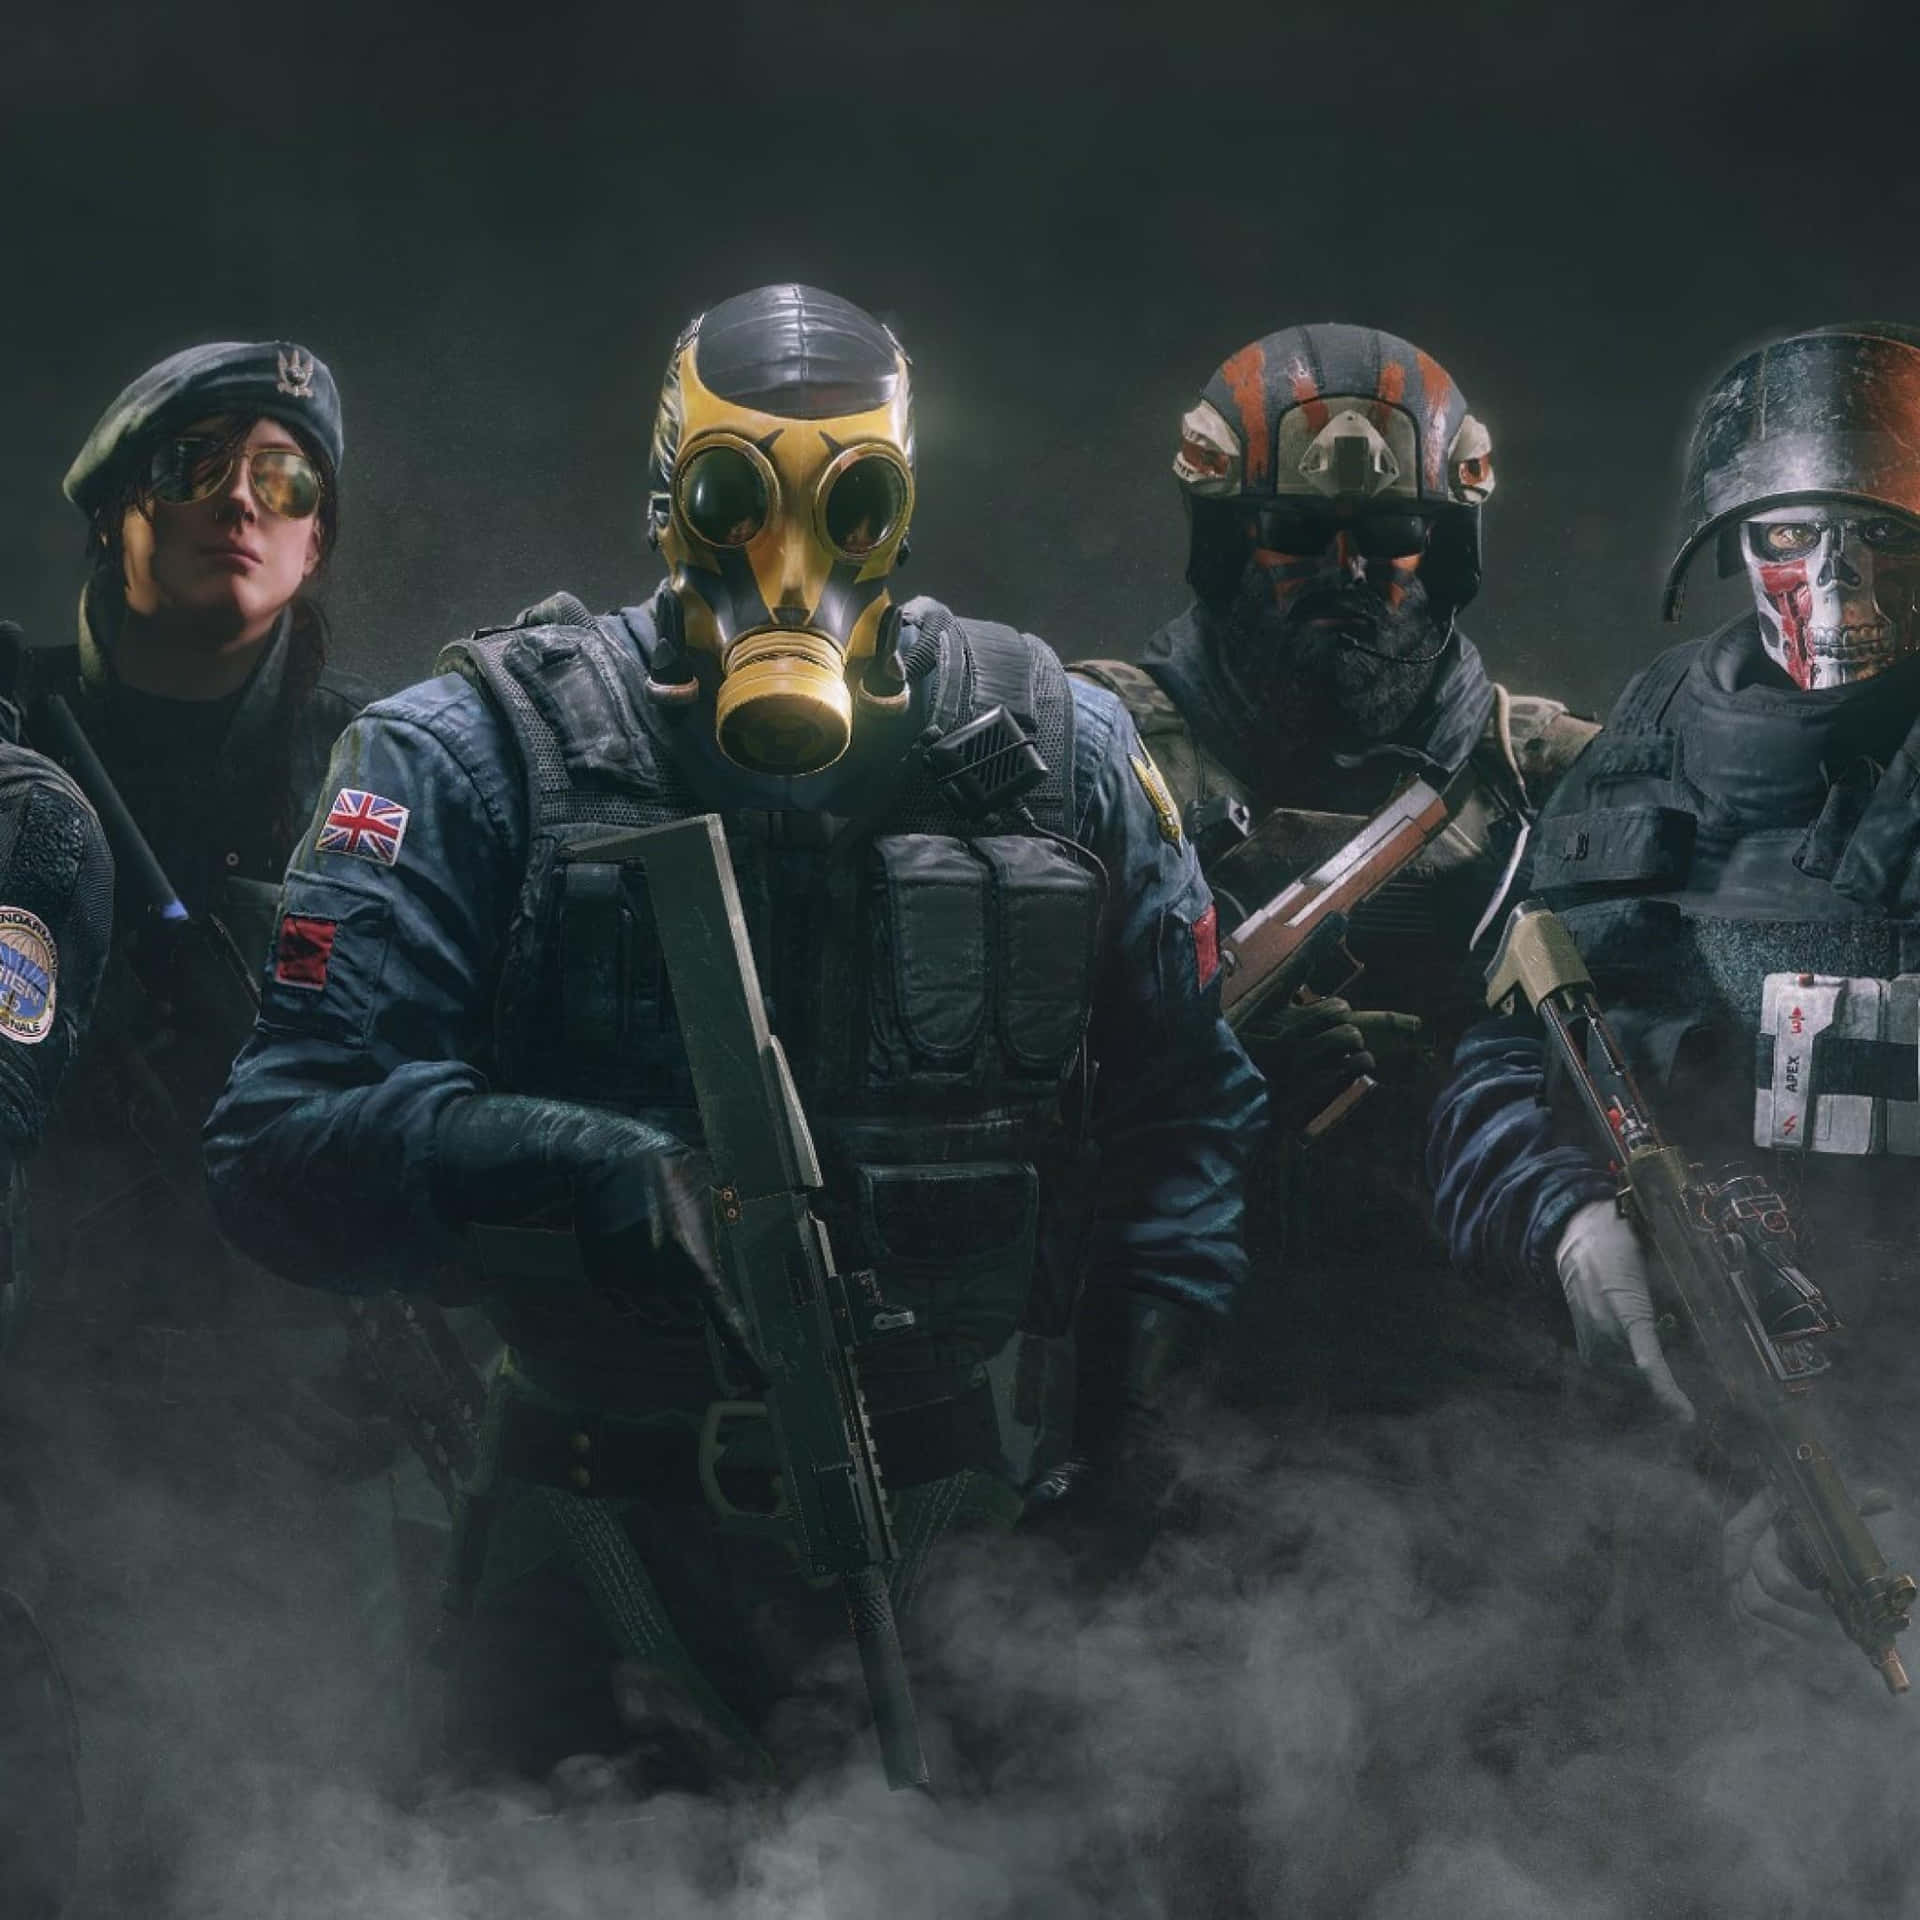 A Swat team ready to protect and serve Wallpaper